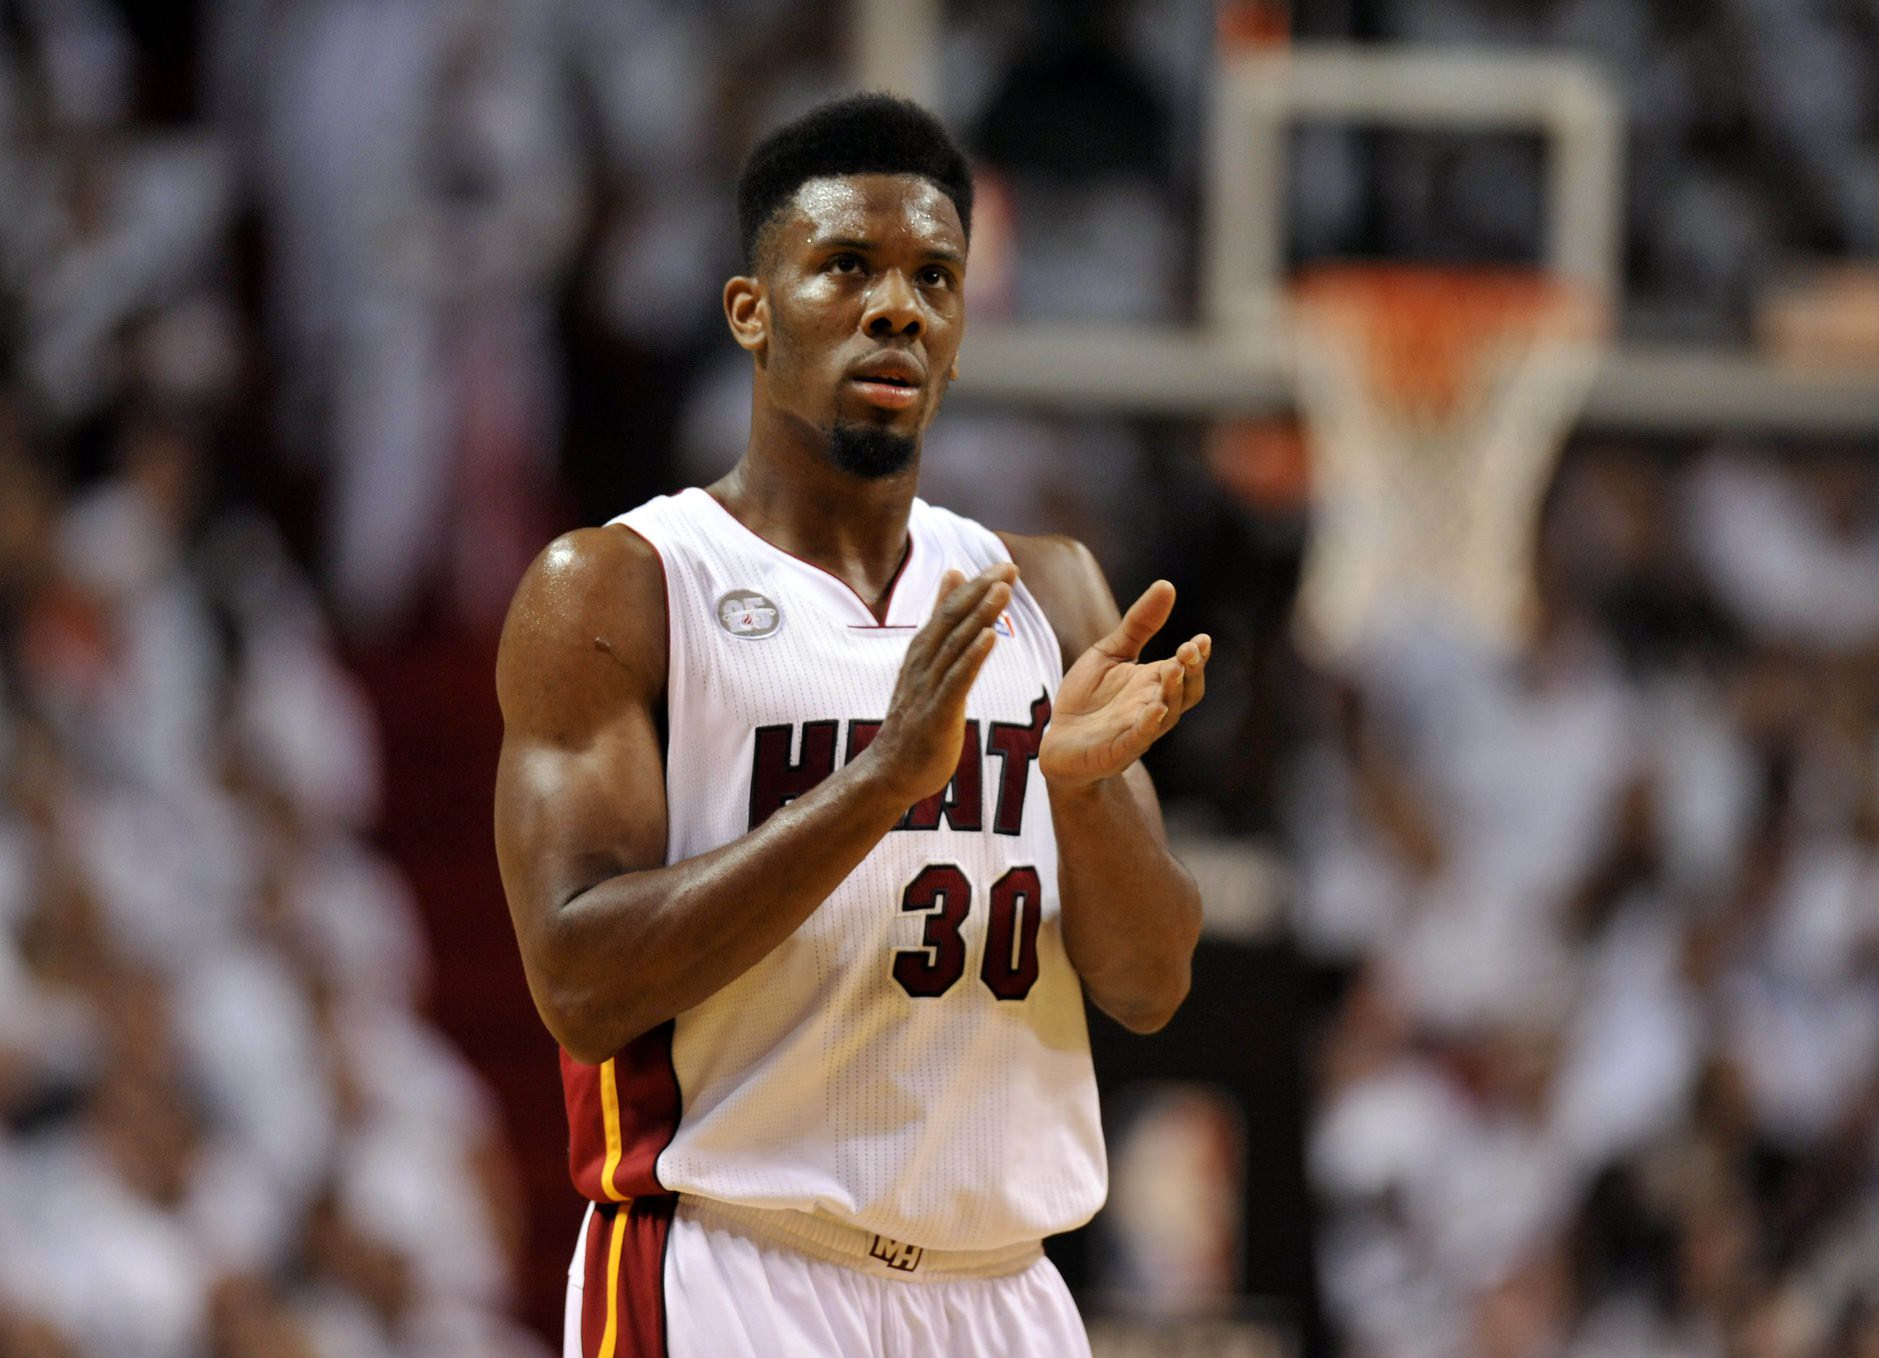 norris cole hair style